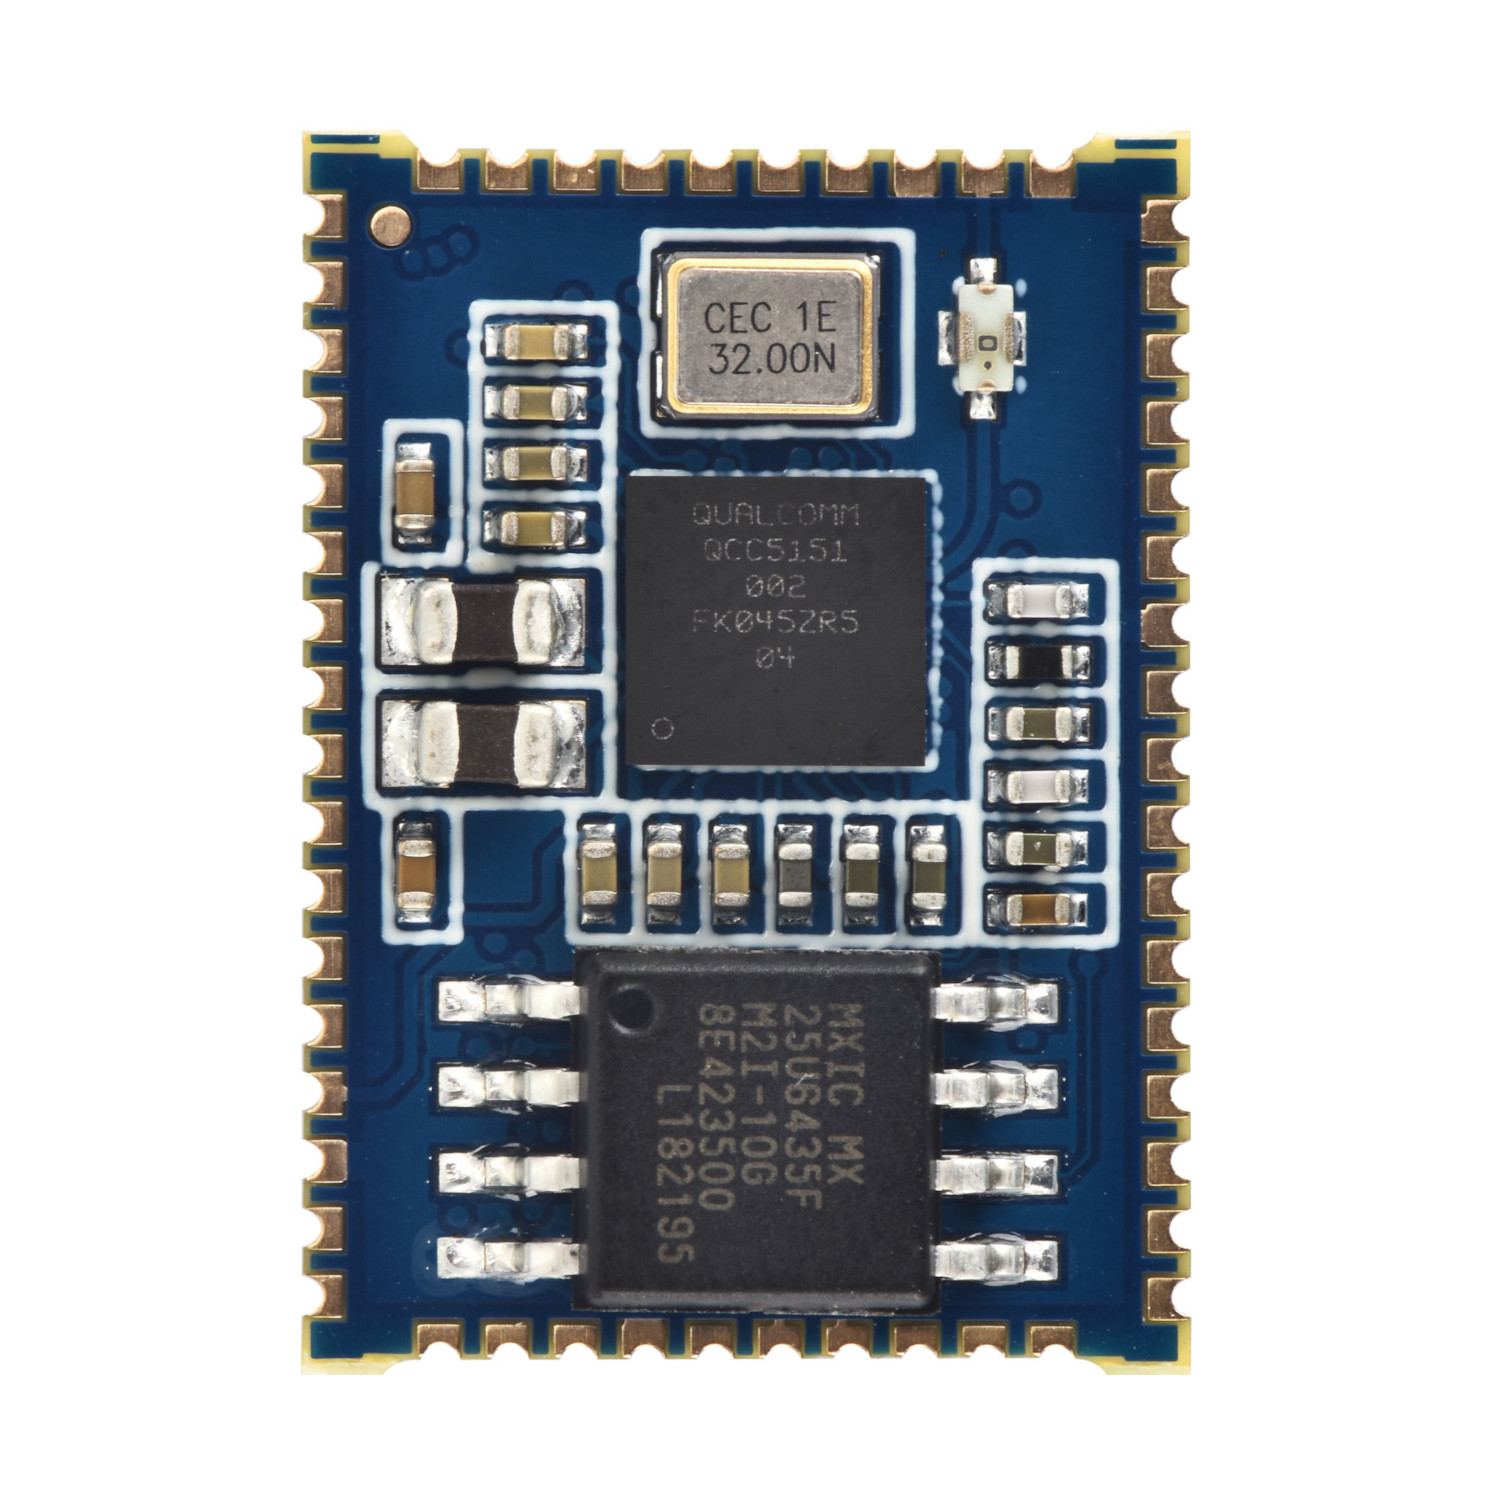 Introduction to BTM551 (QCC5151) Bluetooth module